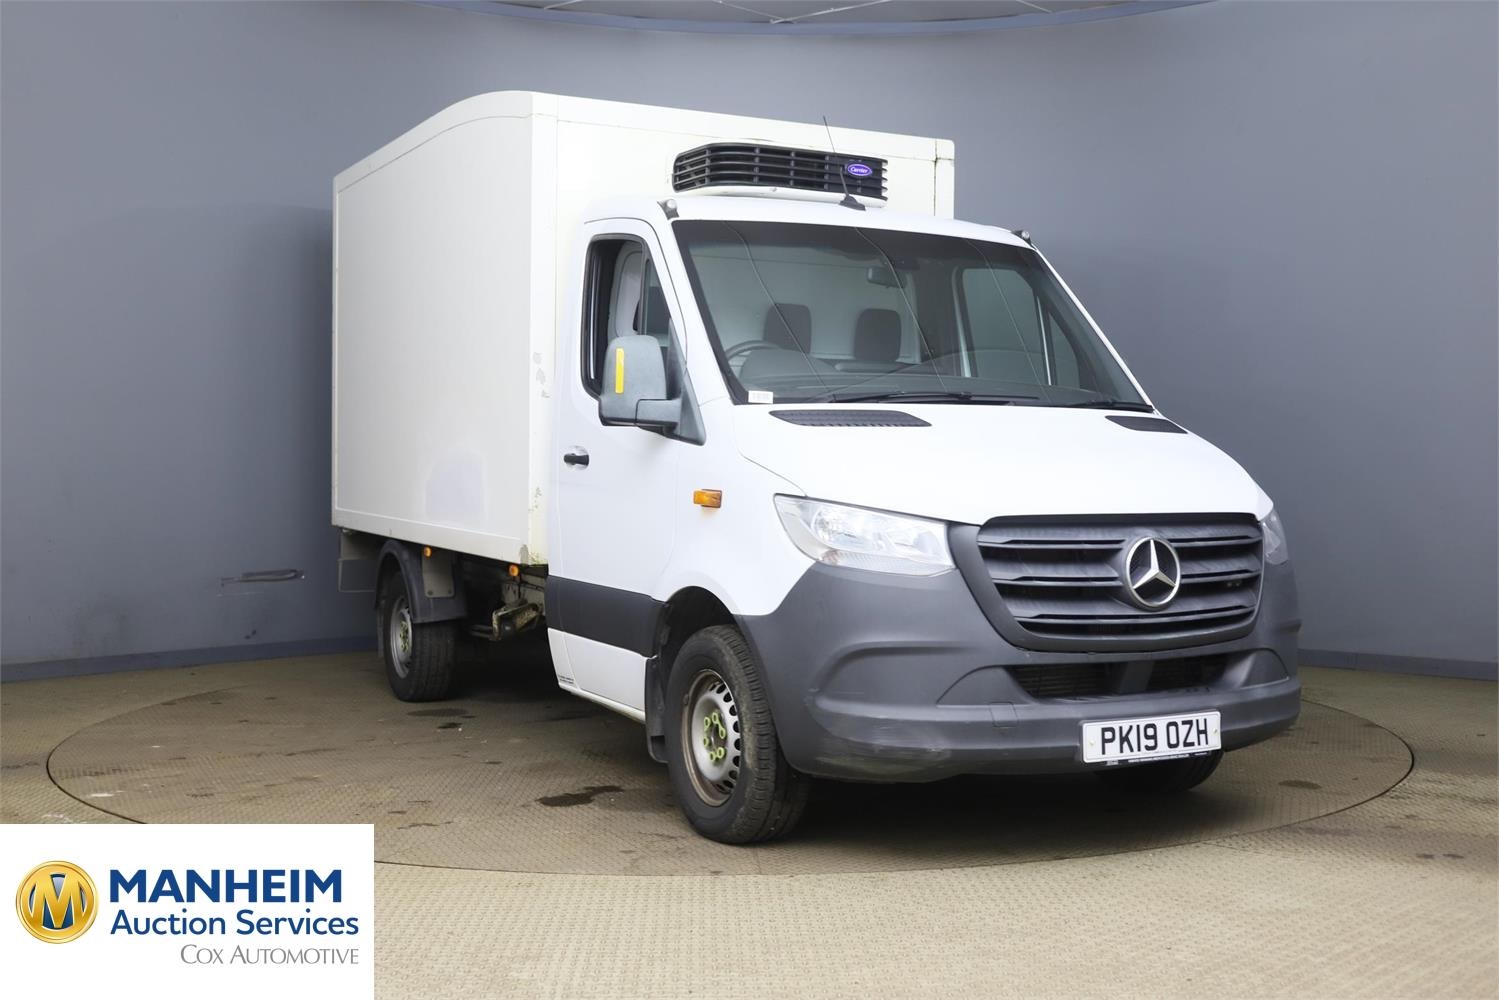 MERCEDES-BENZ
SPRINTER 314CDI L2 DIESEL RWD
3.5t Chassis Cab 7G-Tronic 3 Seats Single Cab